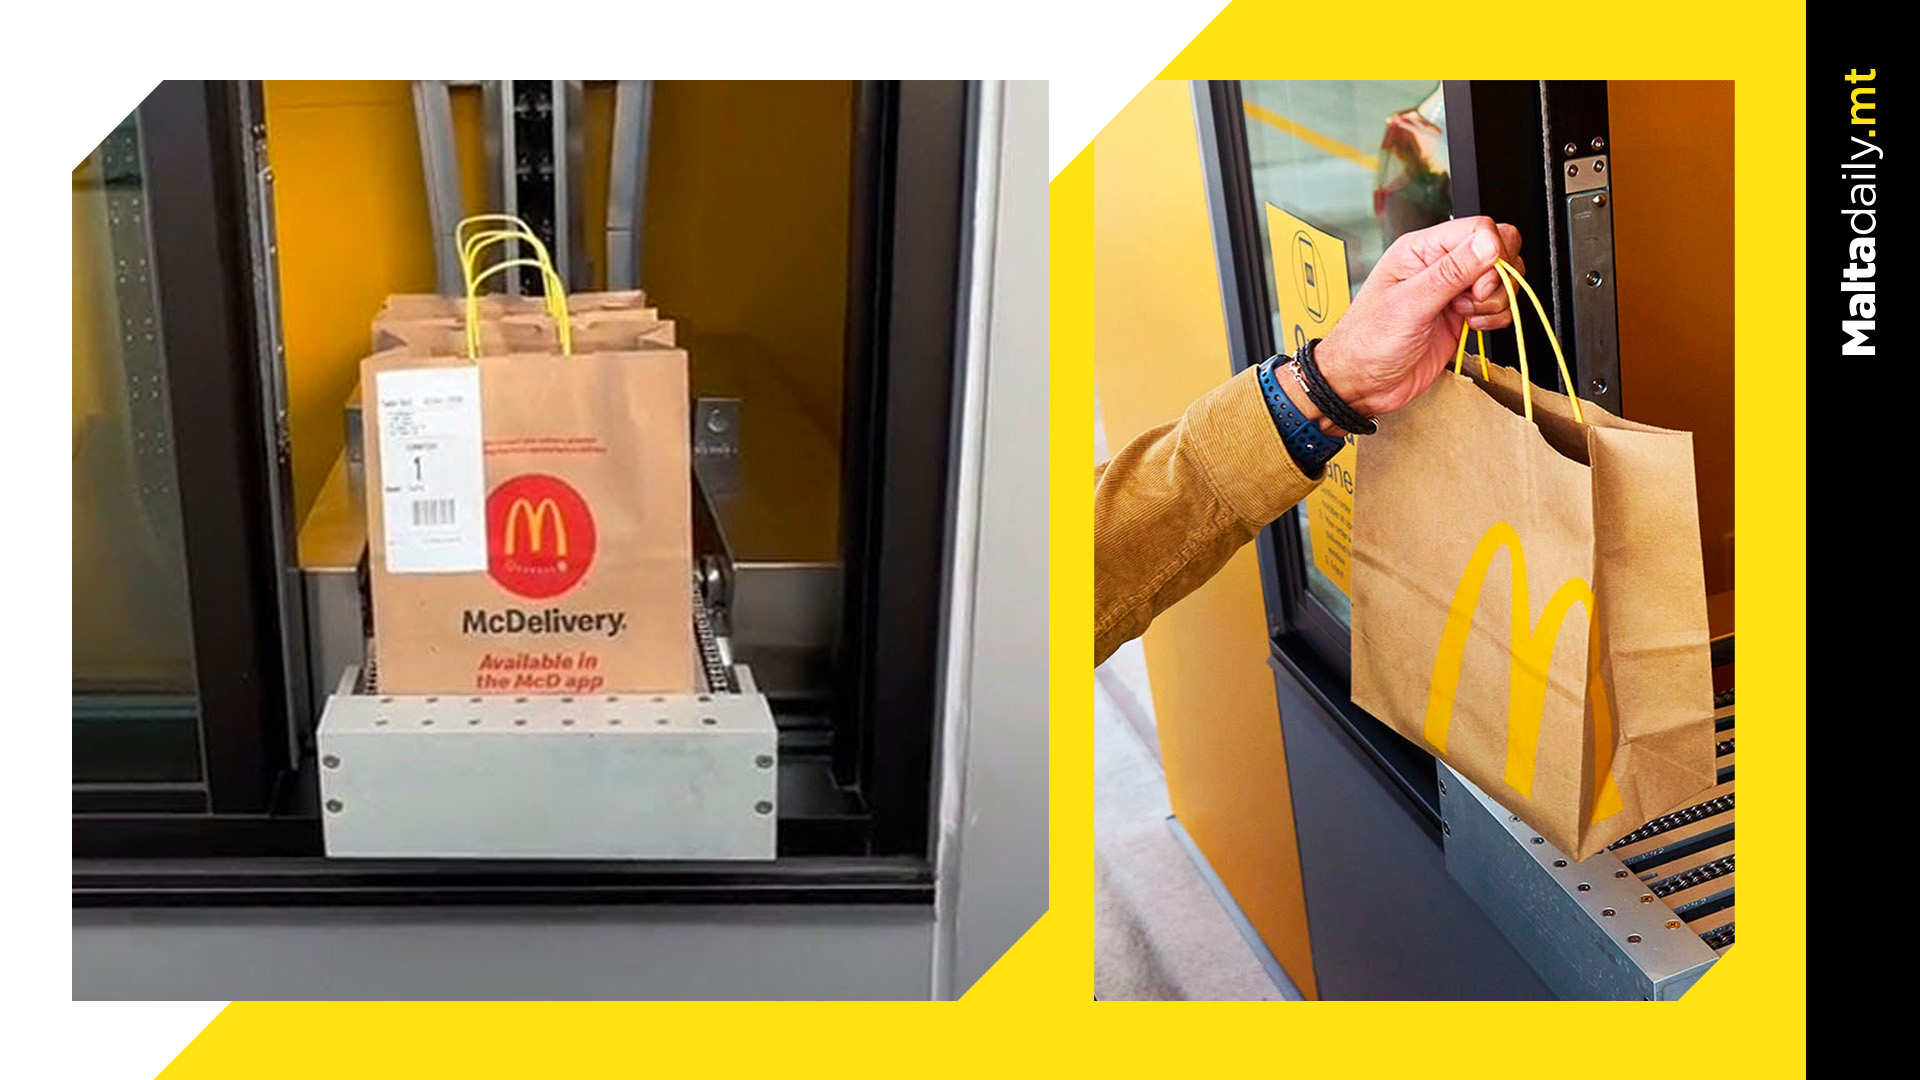 McDonald's are testing out a fully-automated restaurant with ZERO human workers